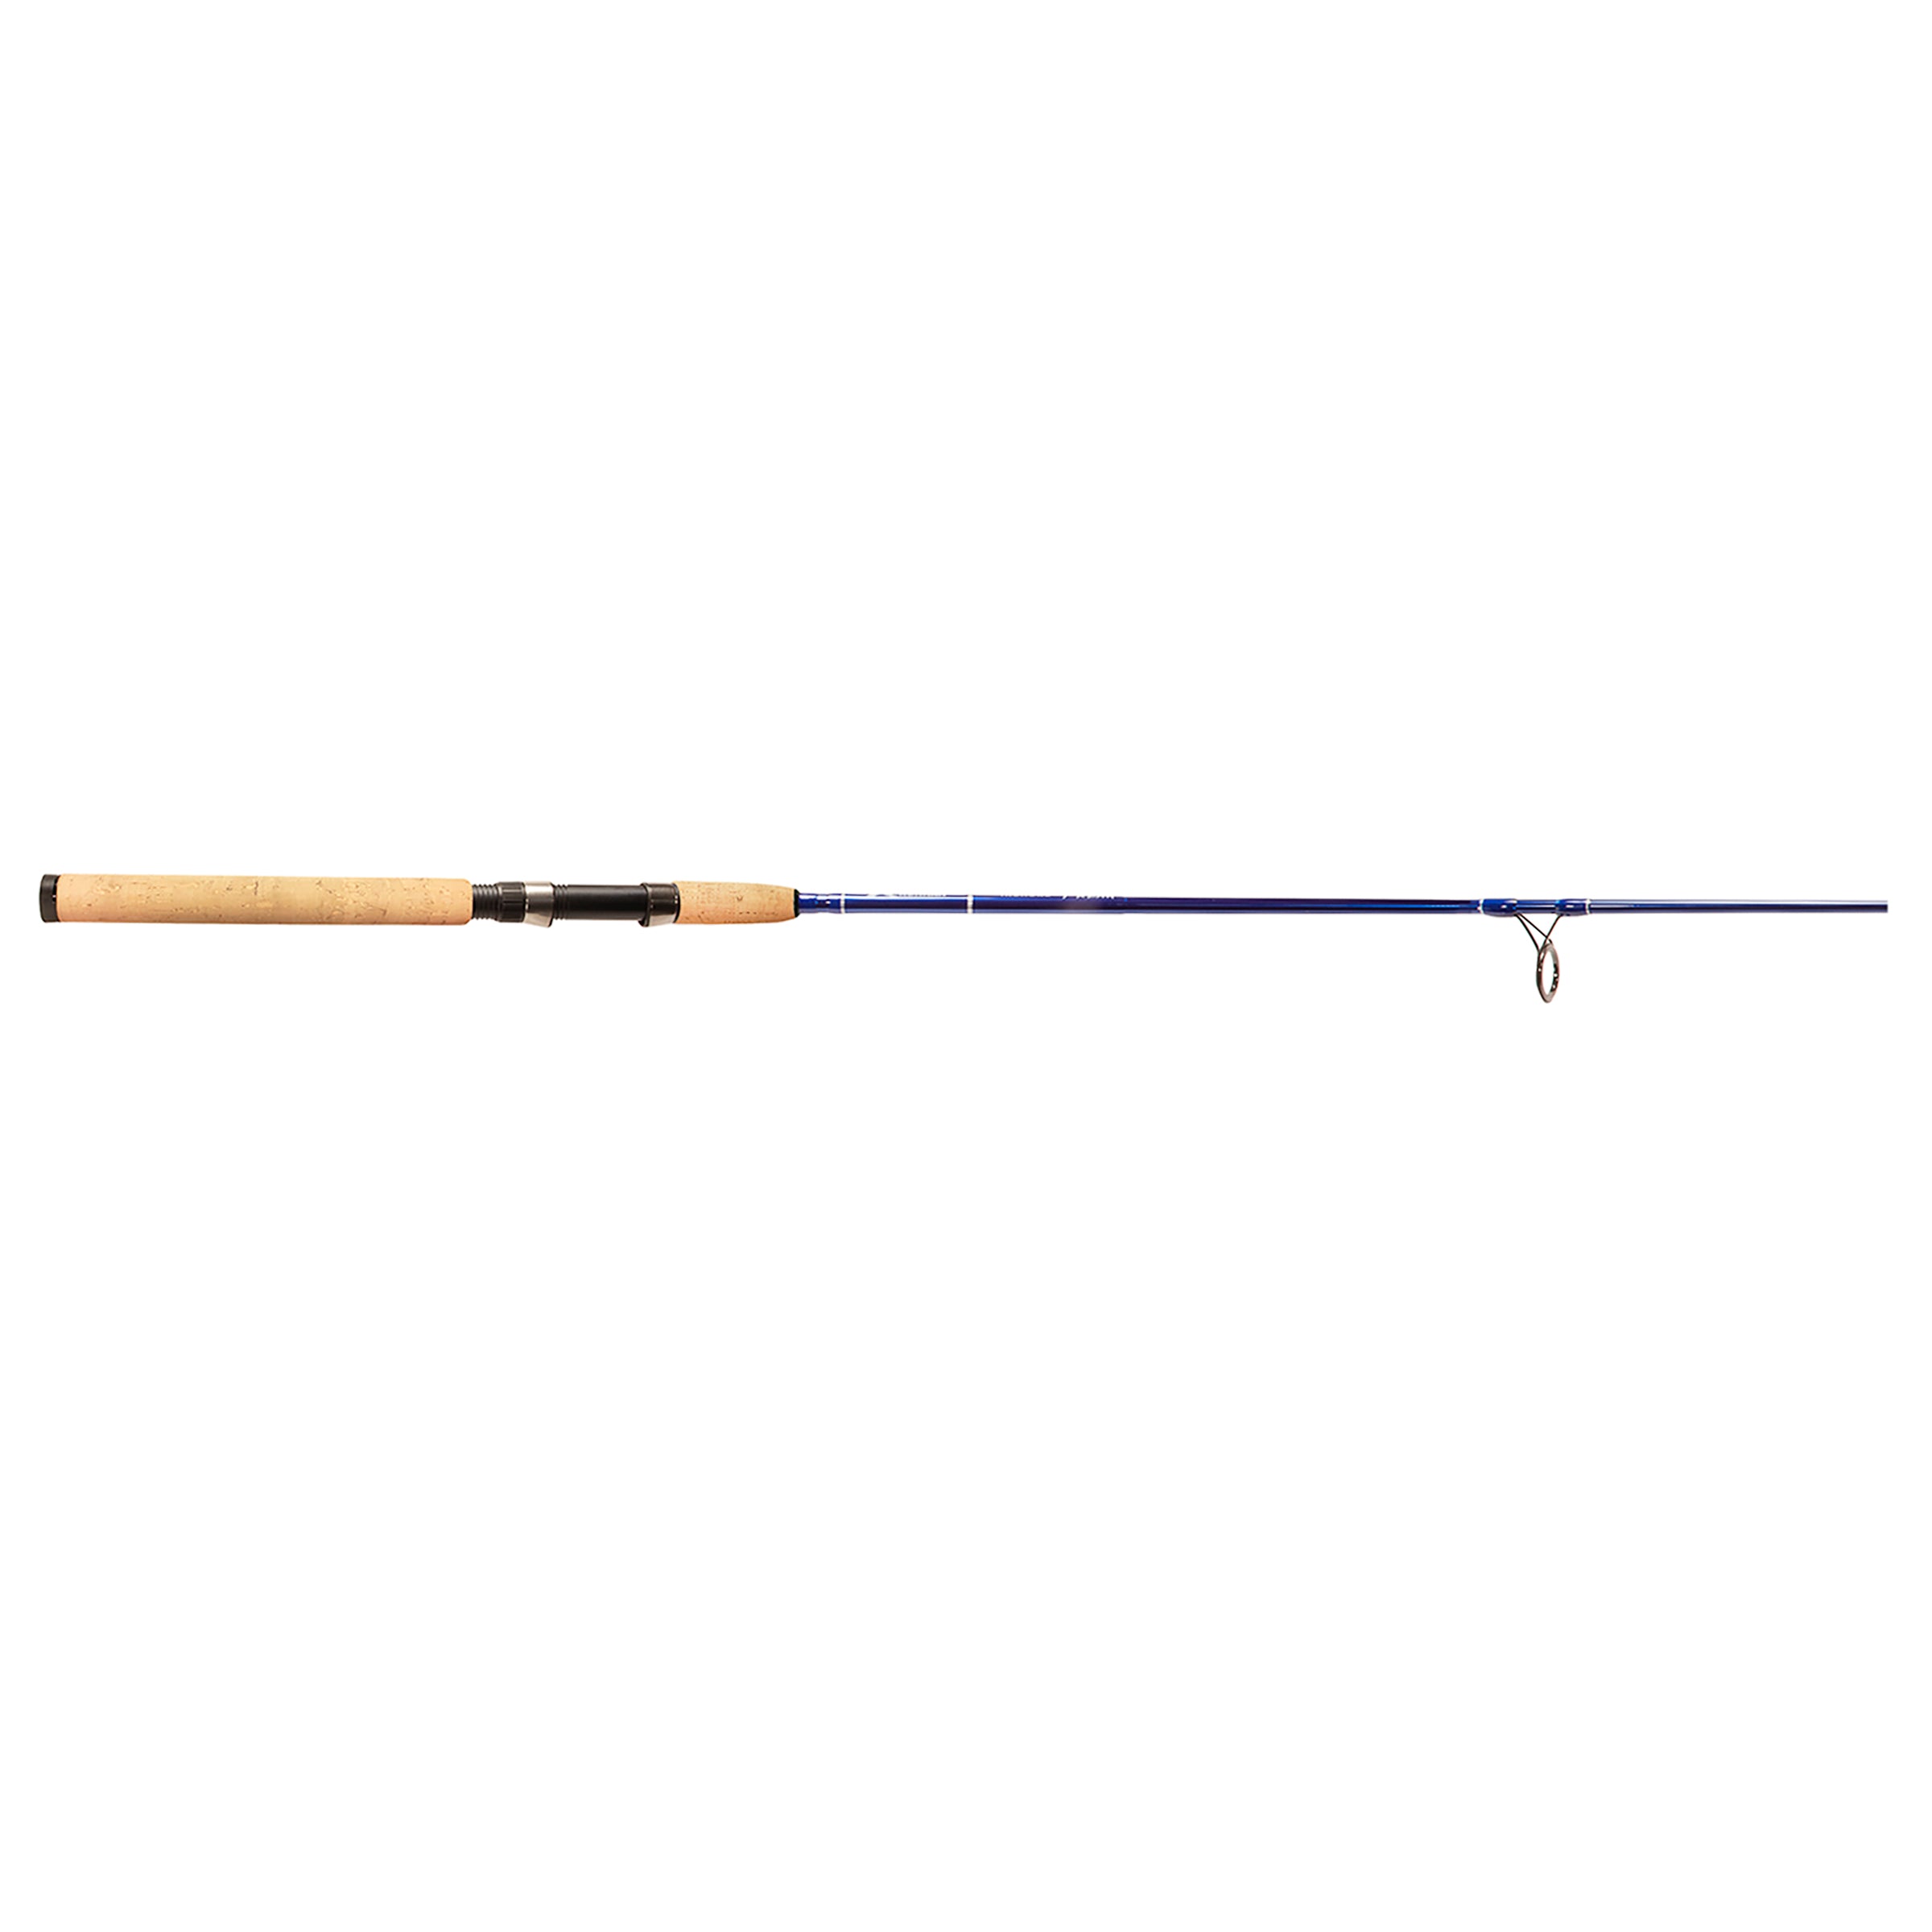 Contour Inshore Spinning Rod